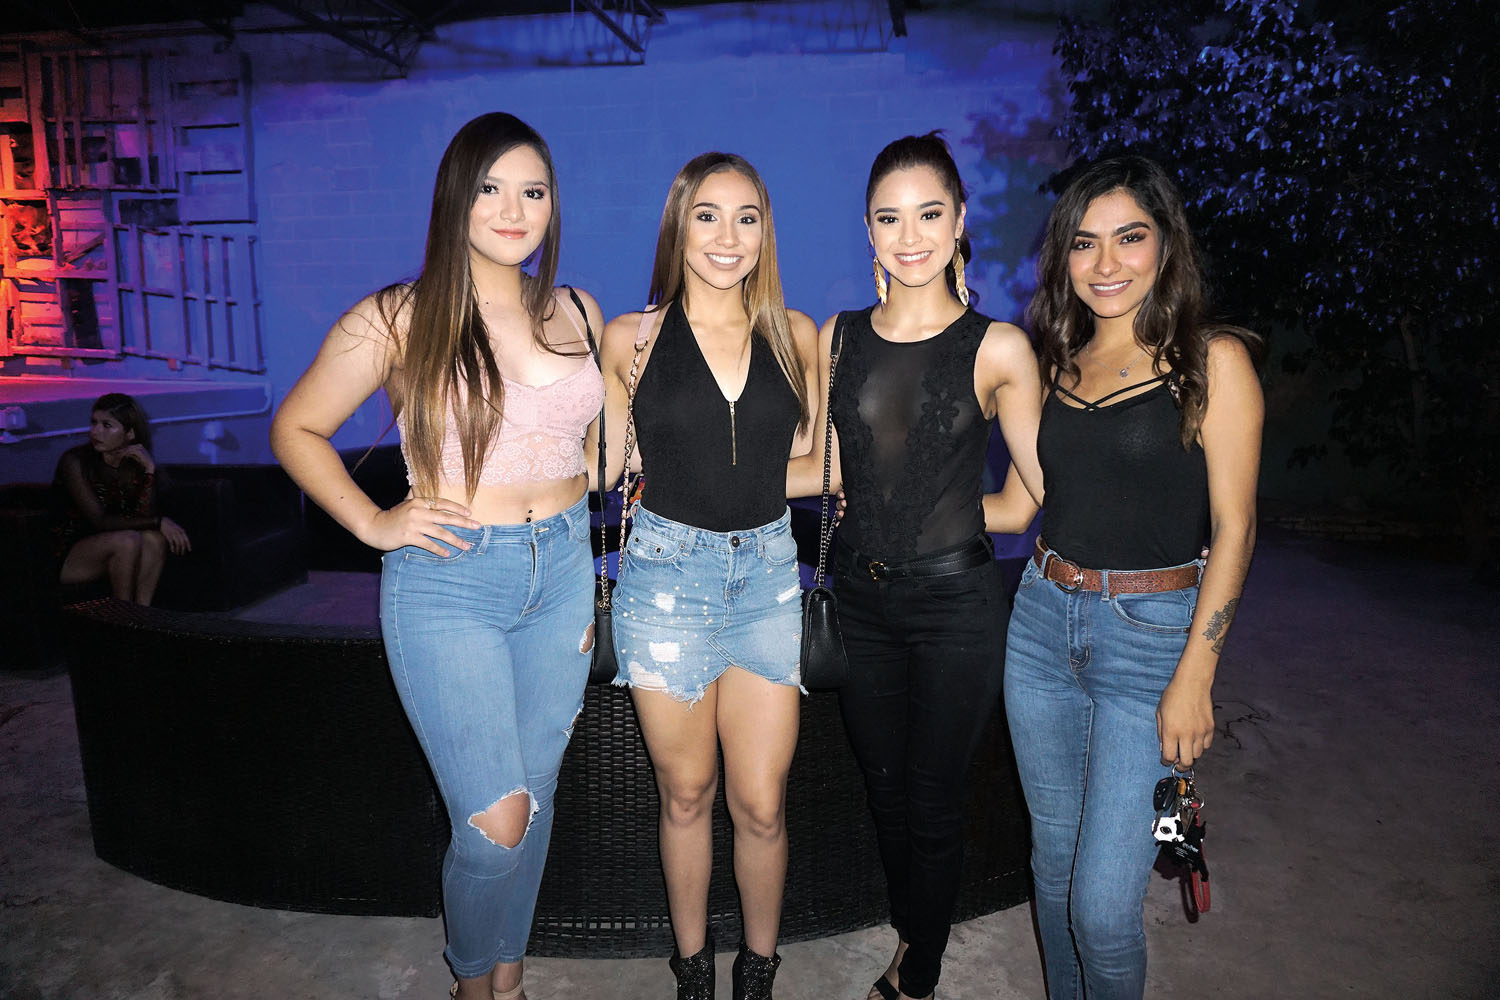 Laredo's nightlife scene once again was populated in heavy numbers, as...